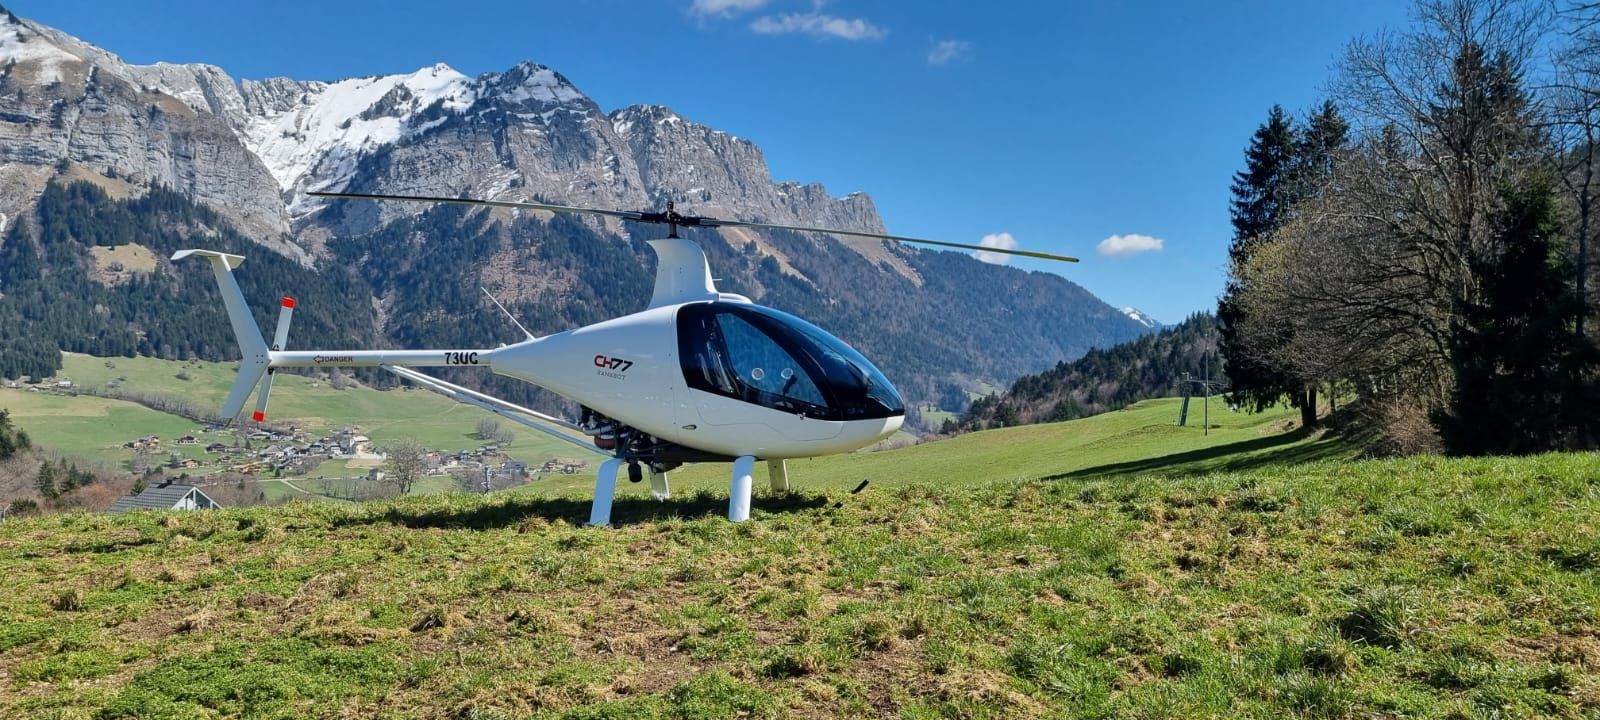 Ulm à vendre - Helicoptere - Ranabot